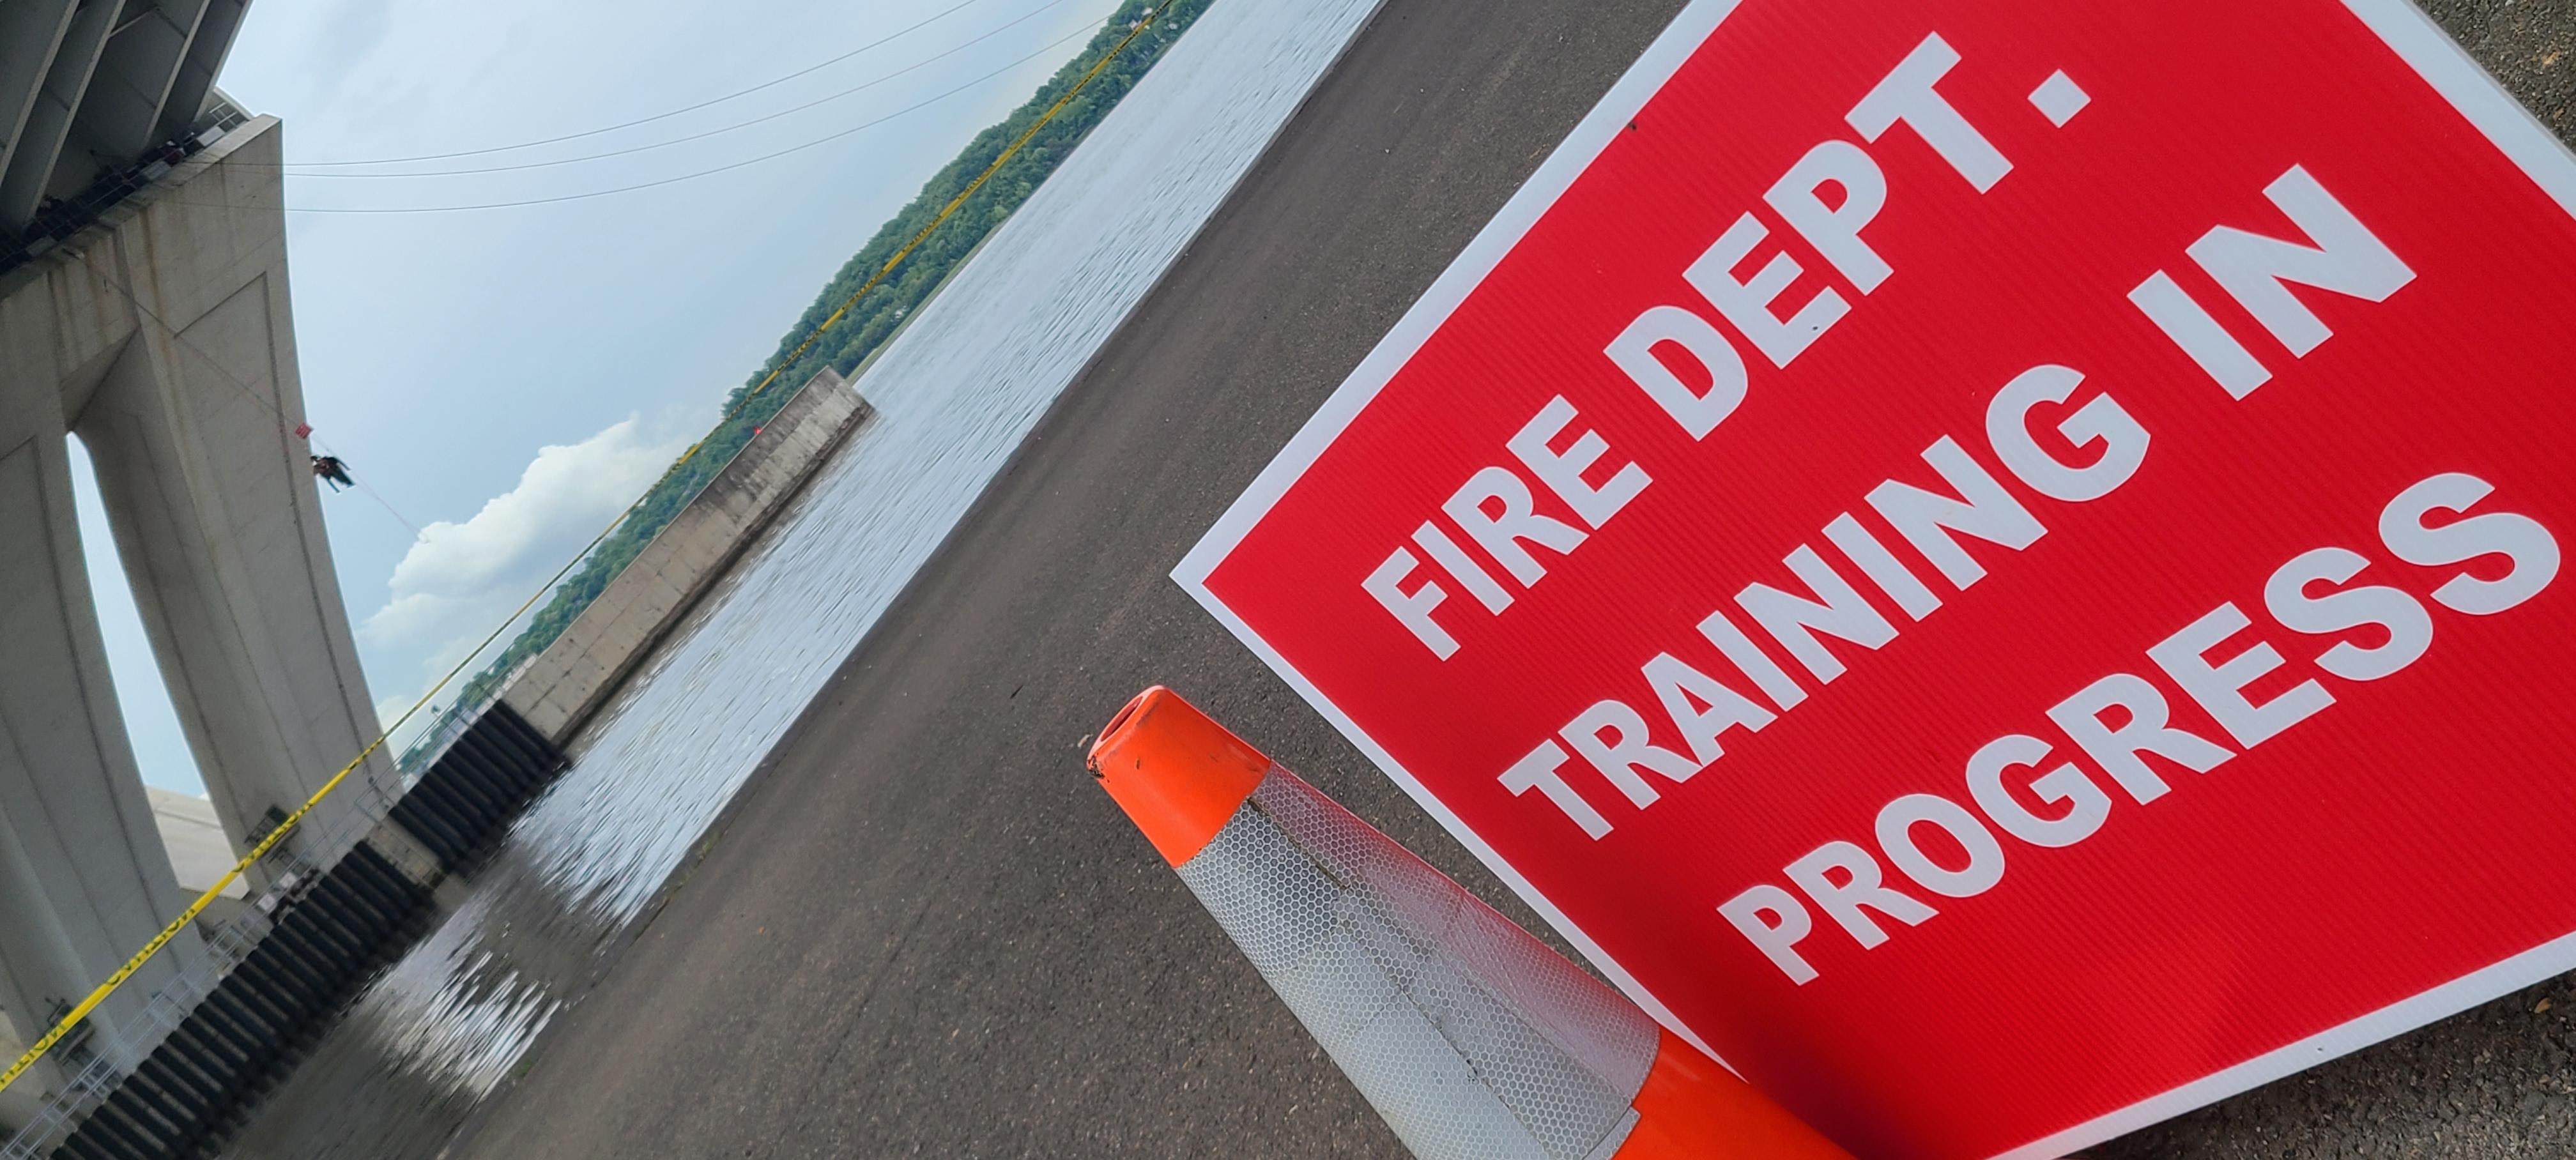 Fire Department Training in Progress Sign